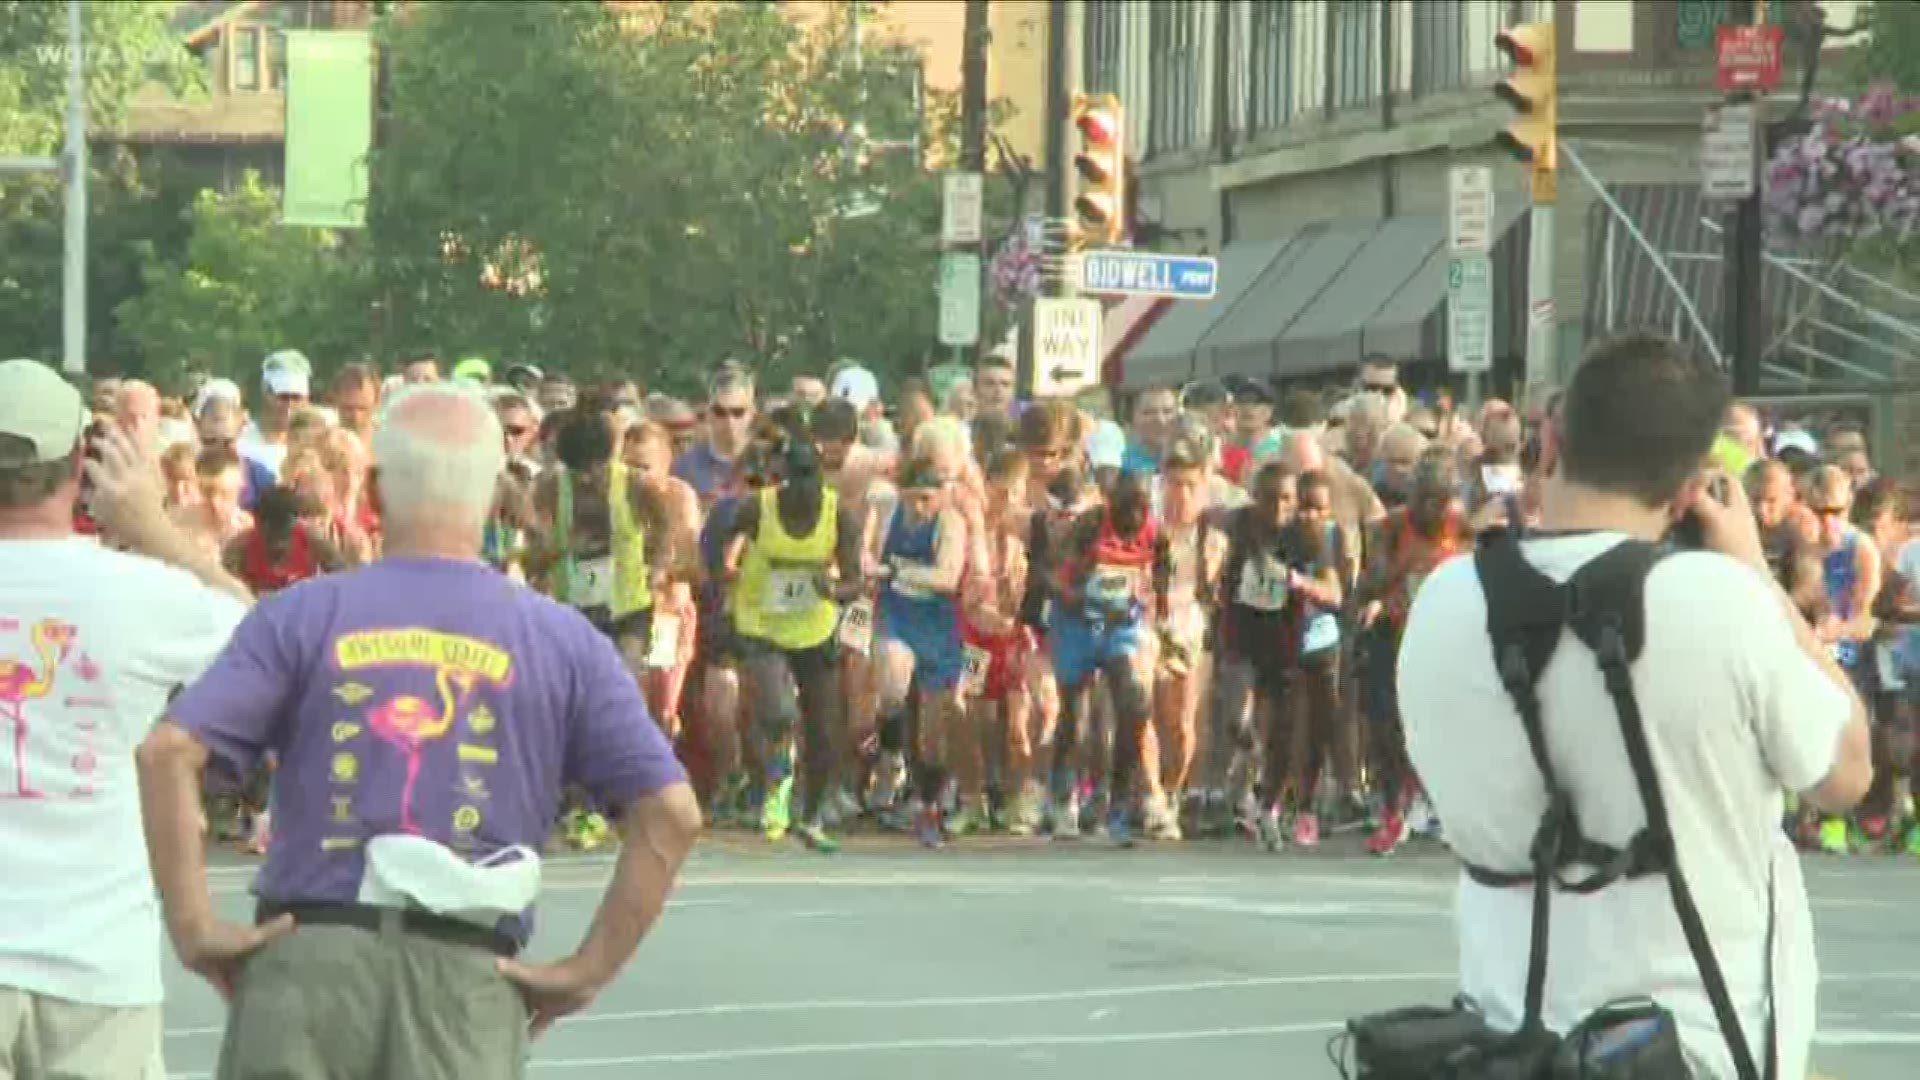 The annual race steps off at 7 p.m., and organizers say they are adding extra water stops and misting stations to help runners stay cool.